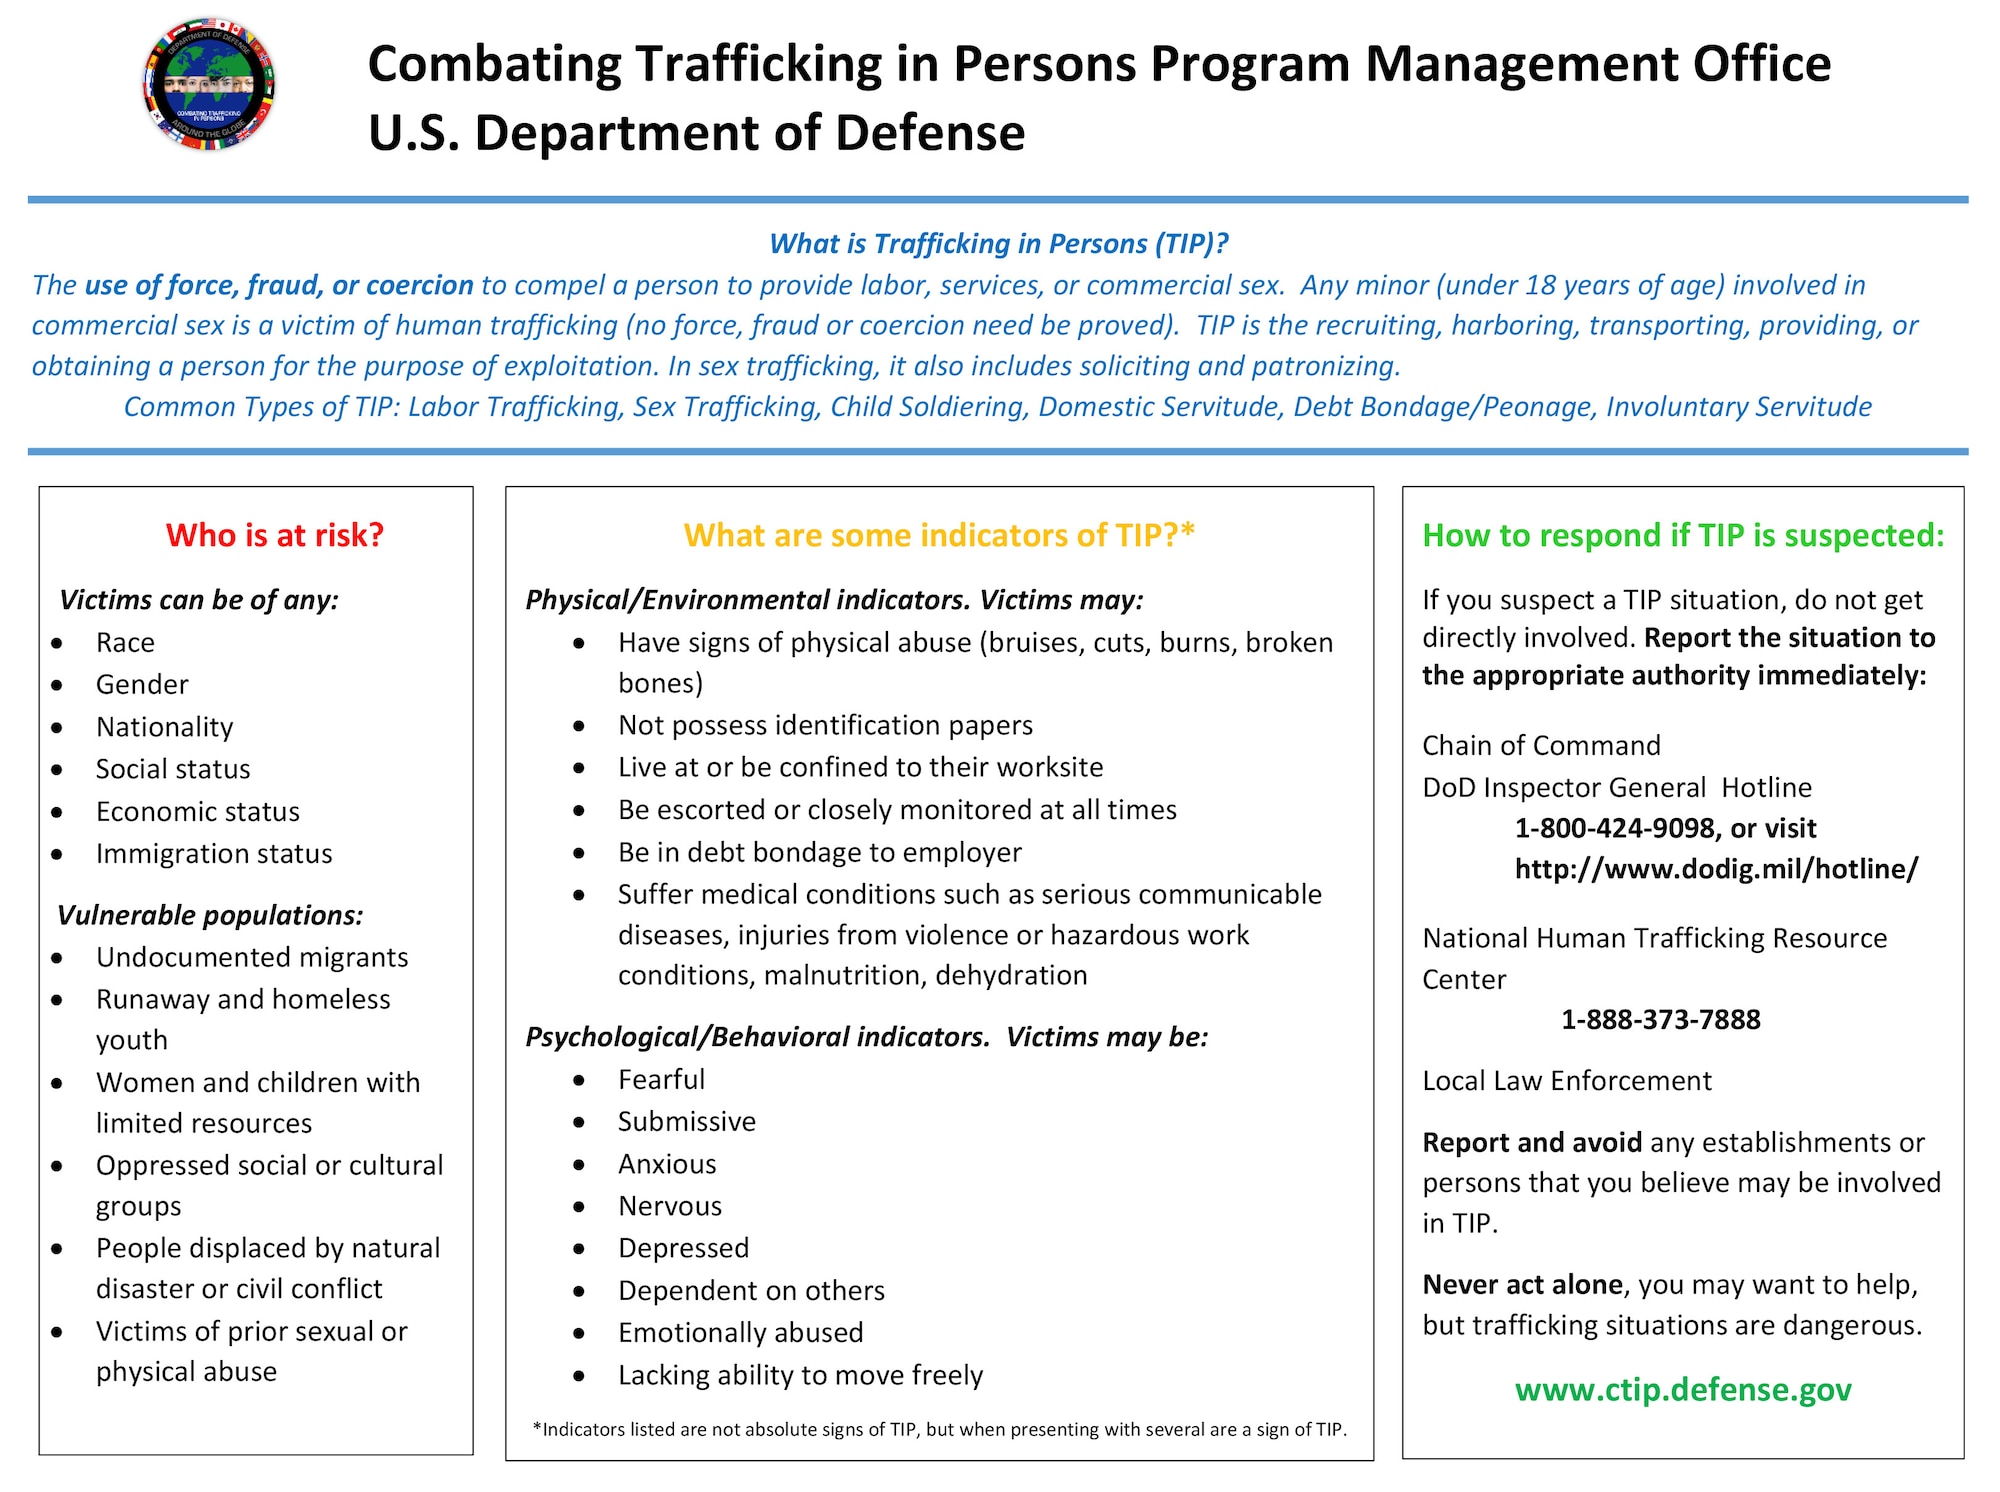 Trafficking in Persons Indicators (DOD graphic)